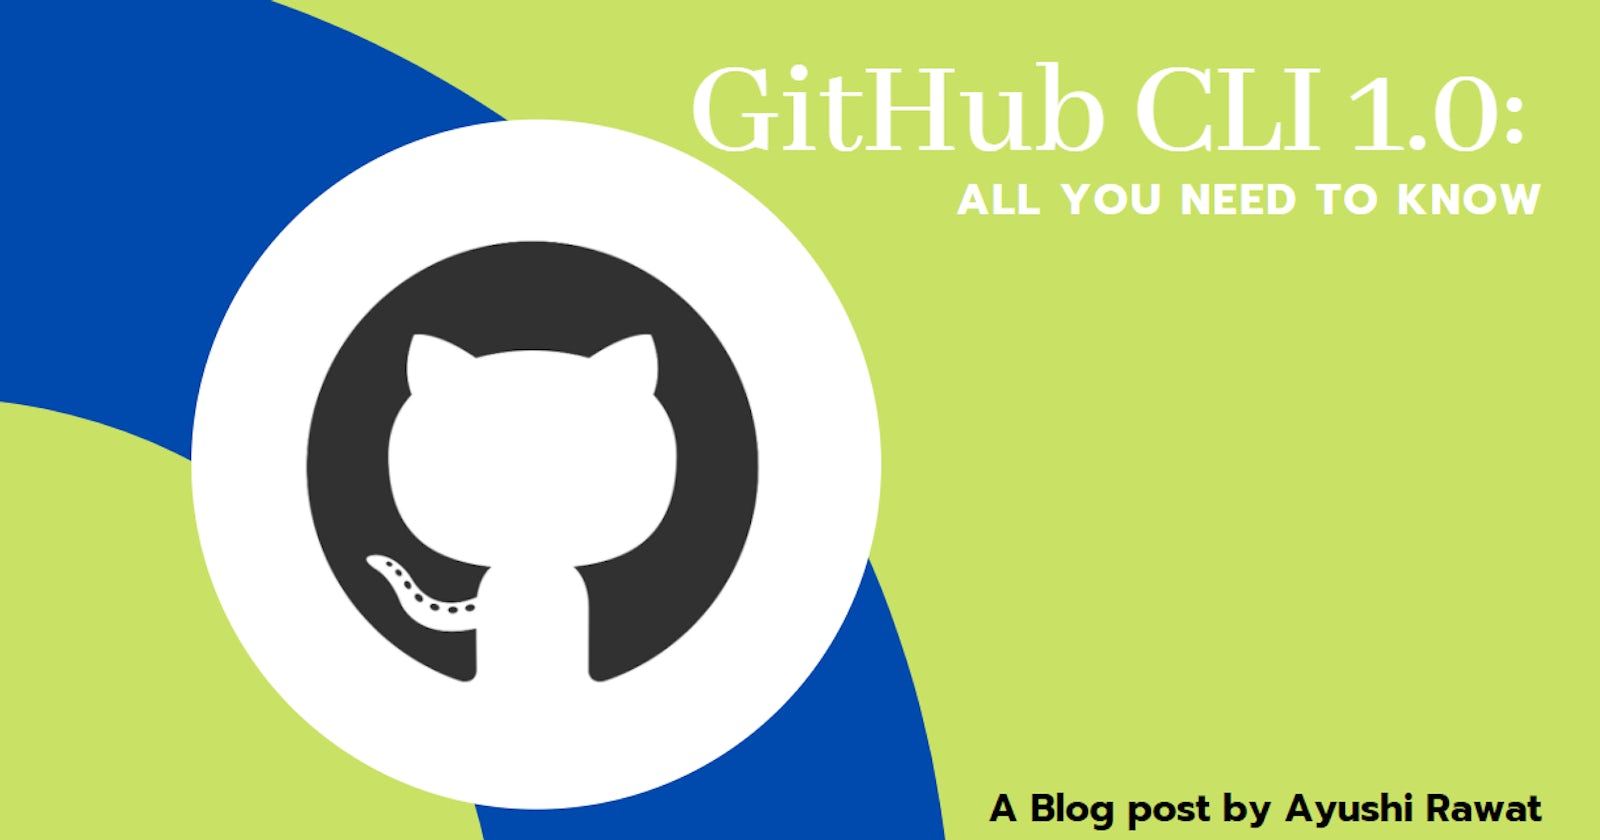 GitHub CLI 1.0: All you need to know